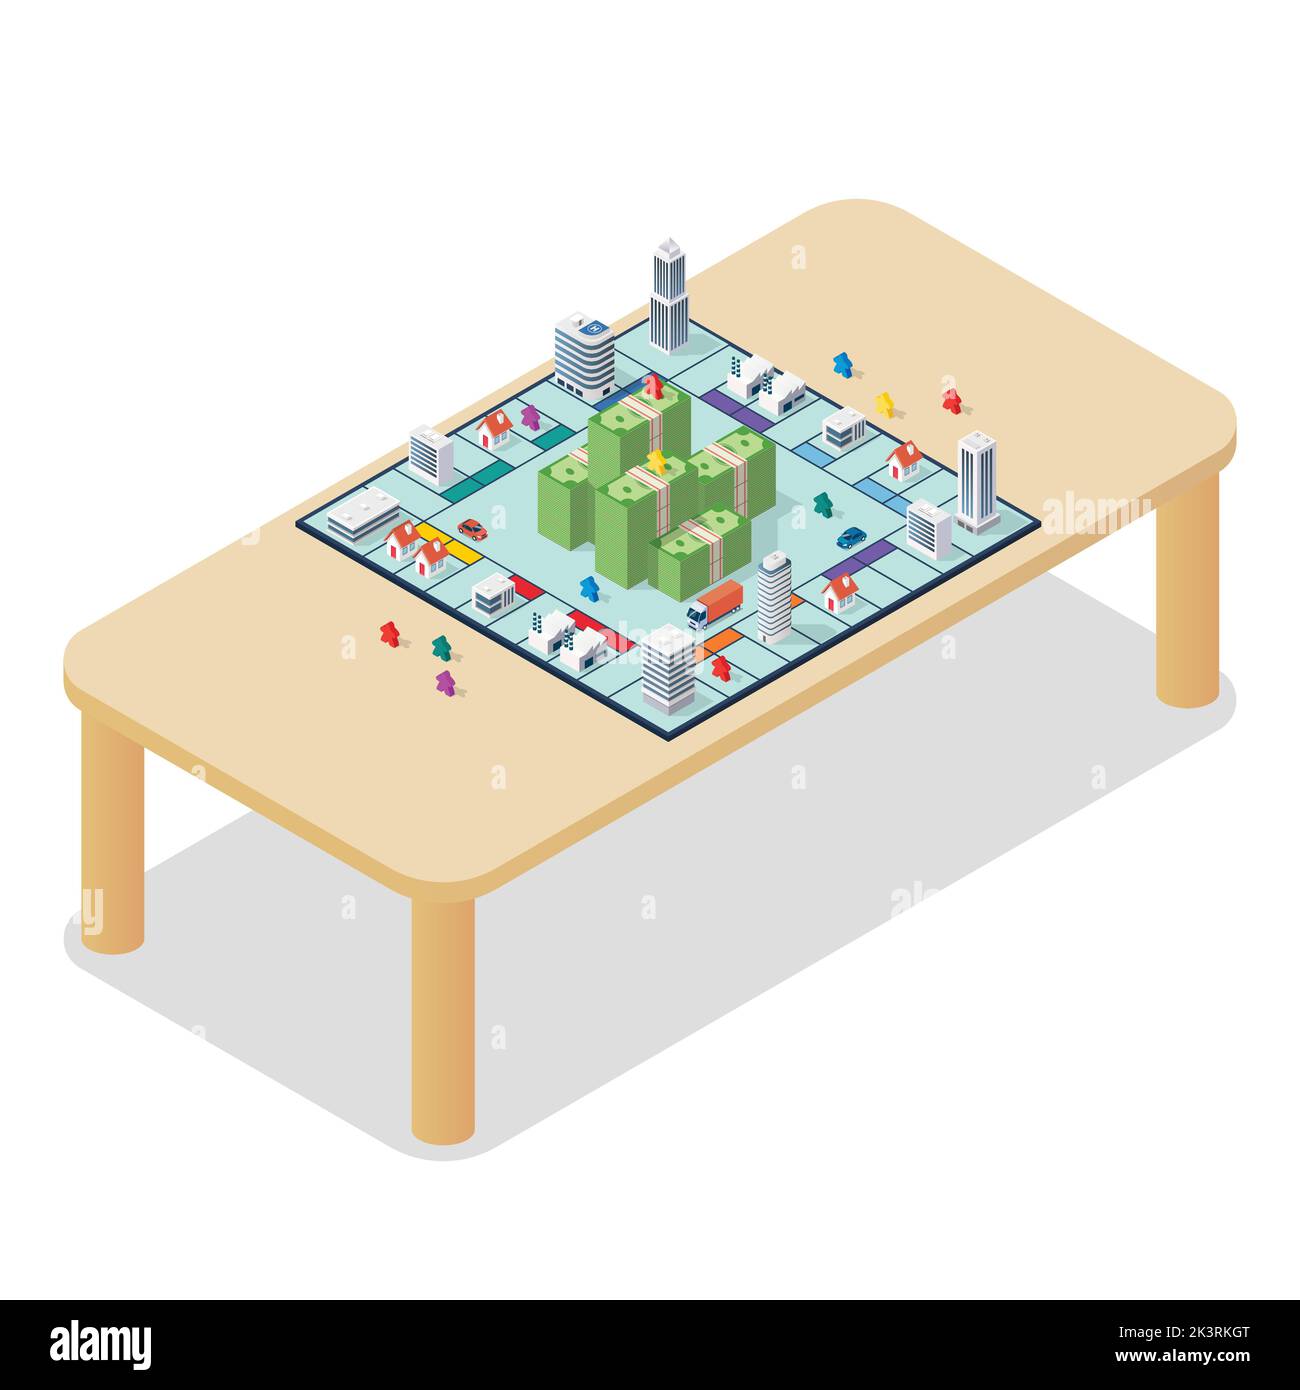 Board game on the table. isometric view. Leisure hobby concept. Vector illustration Stock Vector